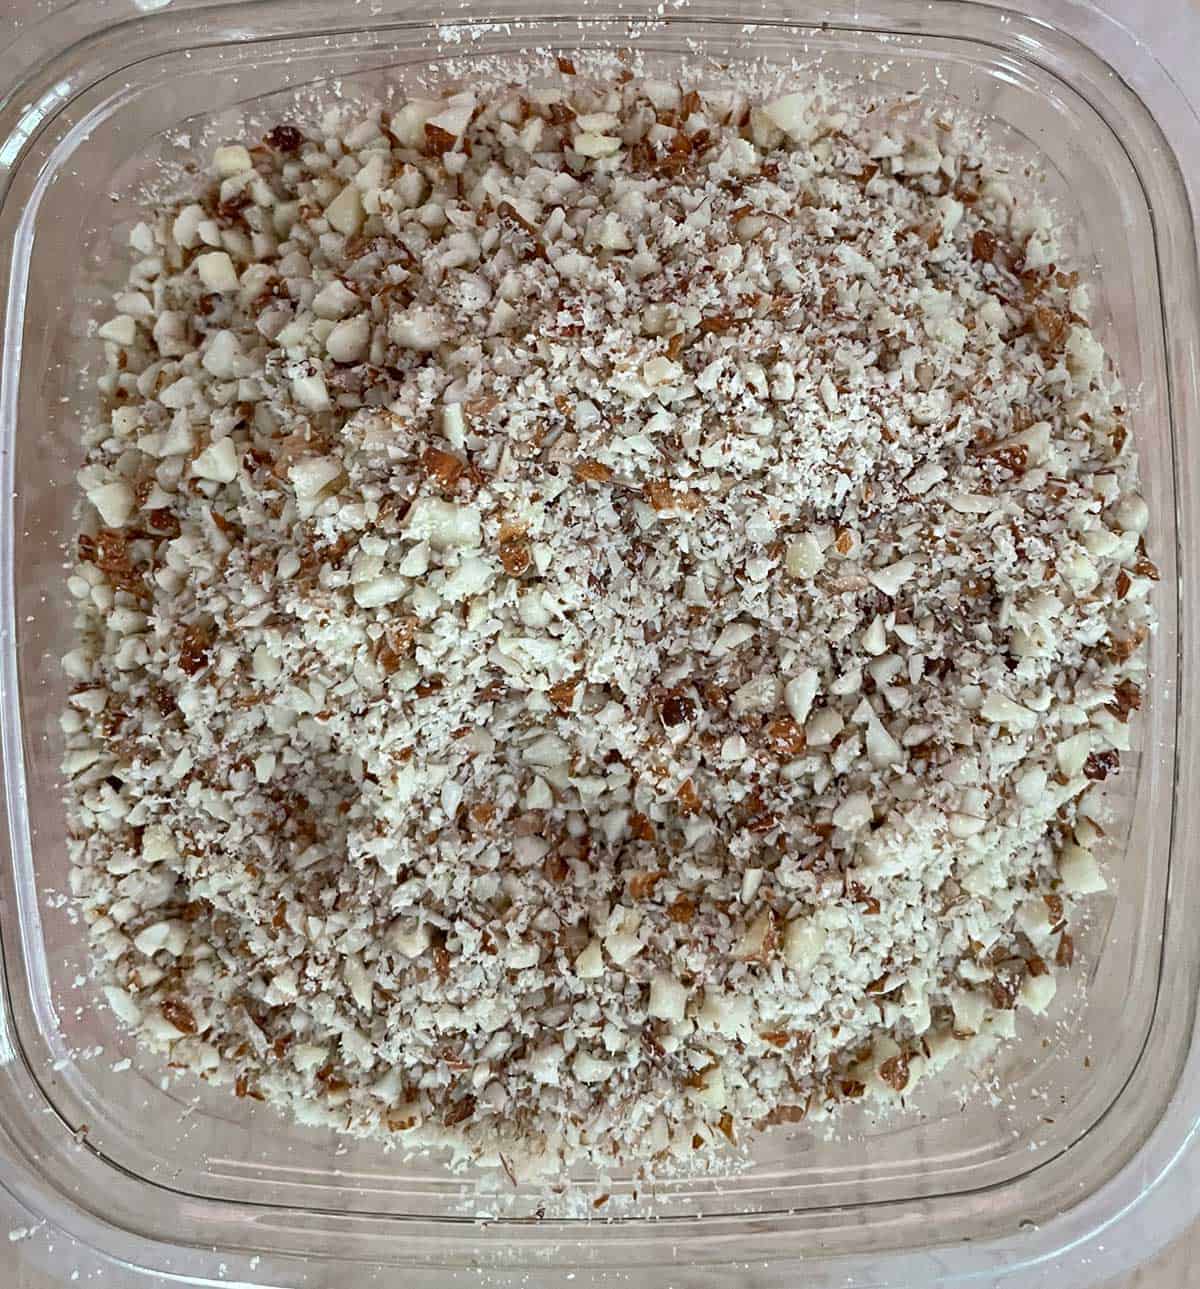 Almond Crescent - chopped up almonds that were pulsed in a food processor.